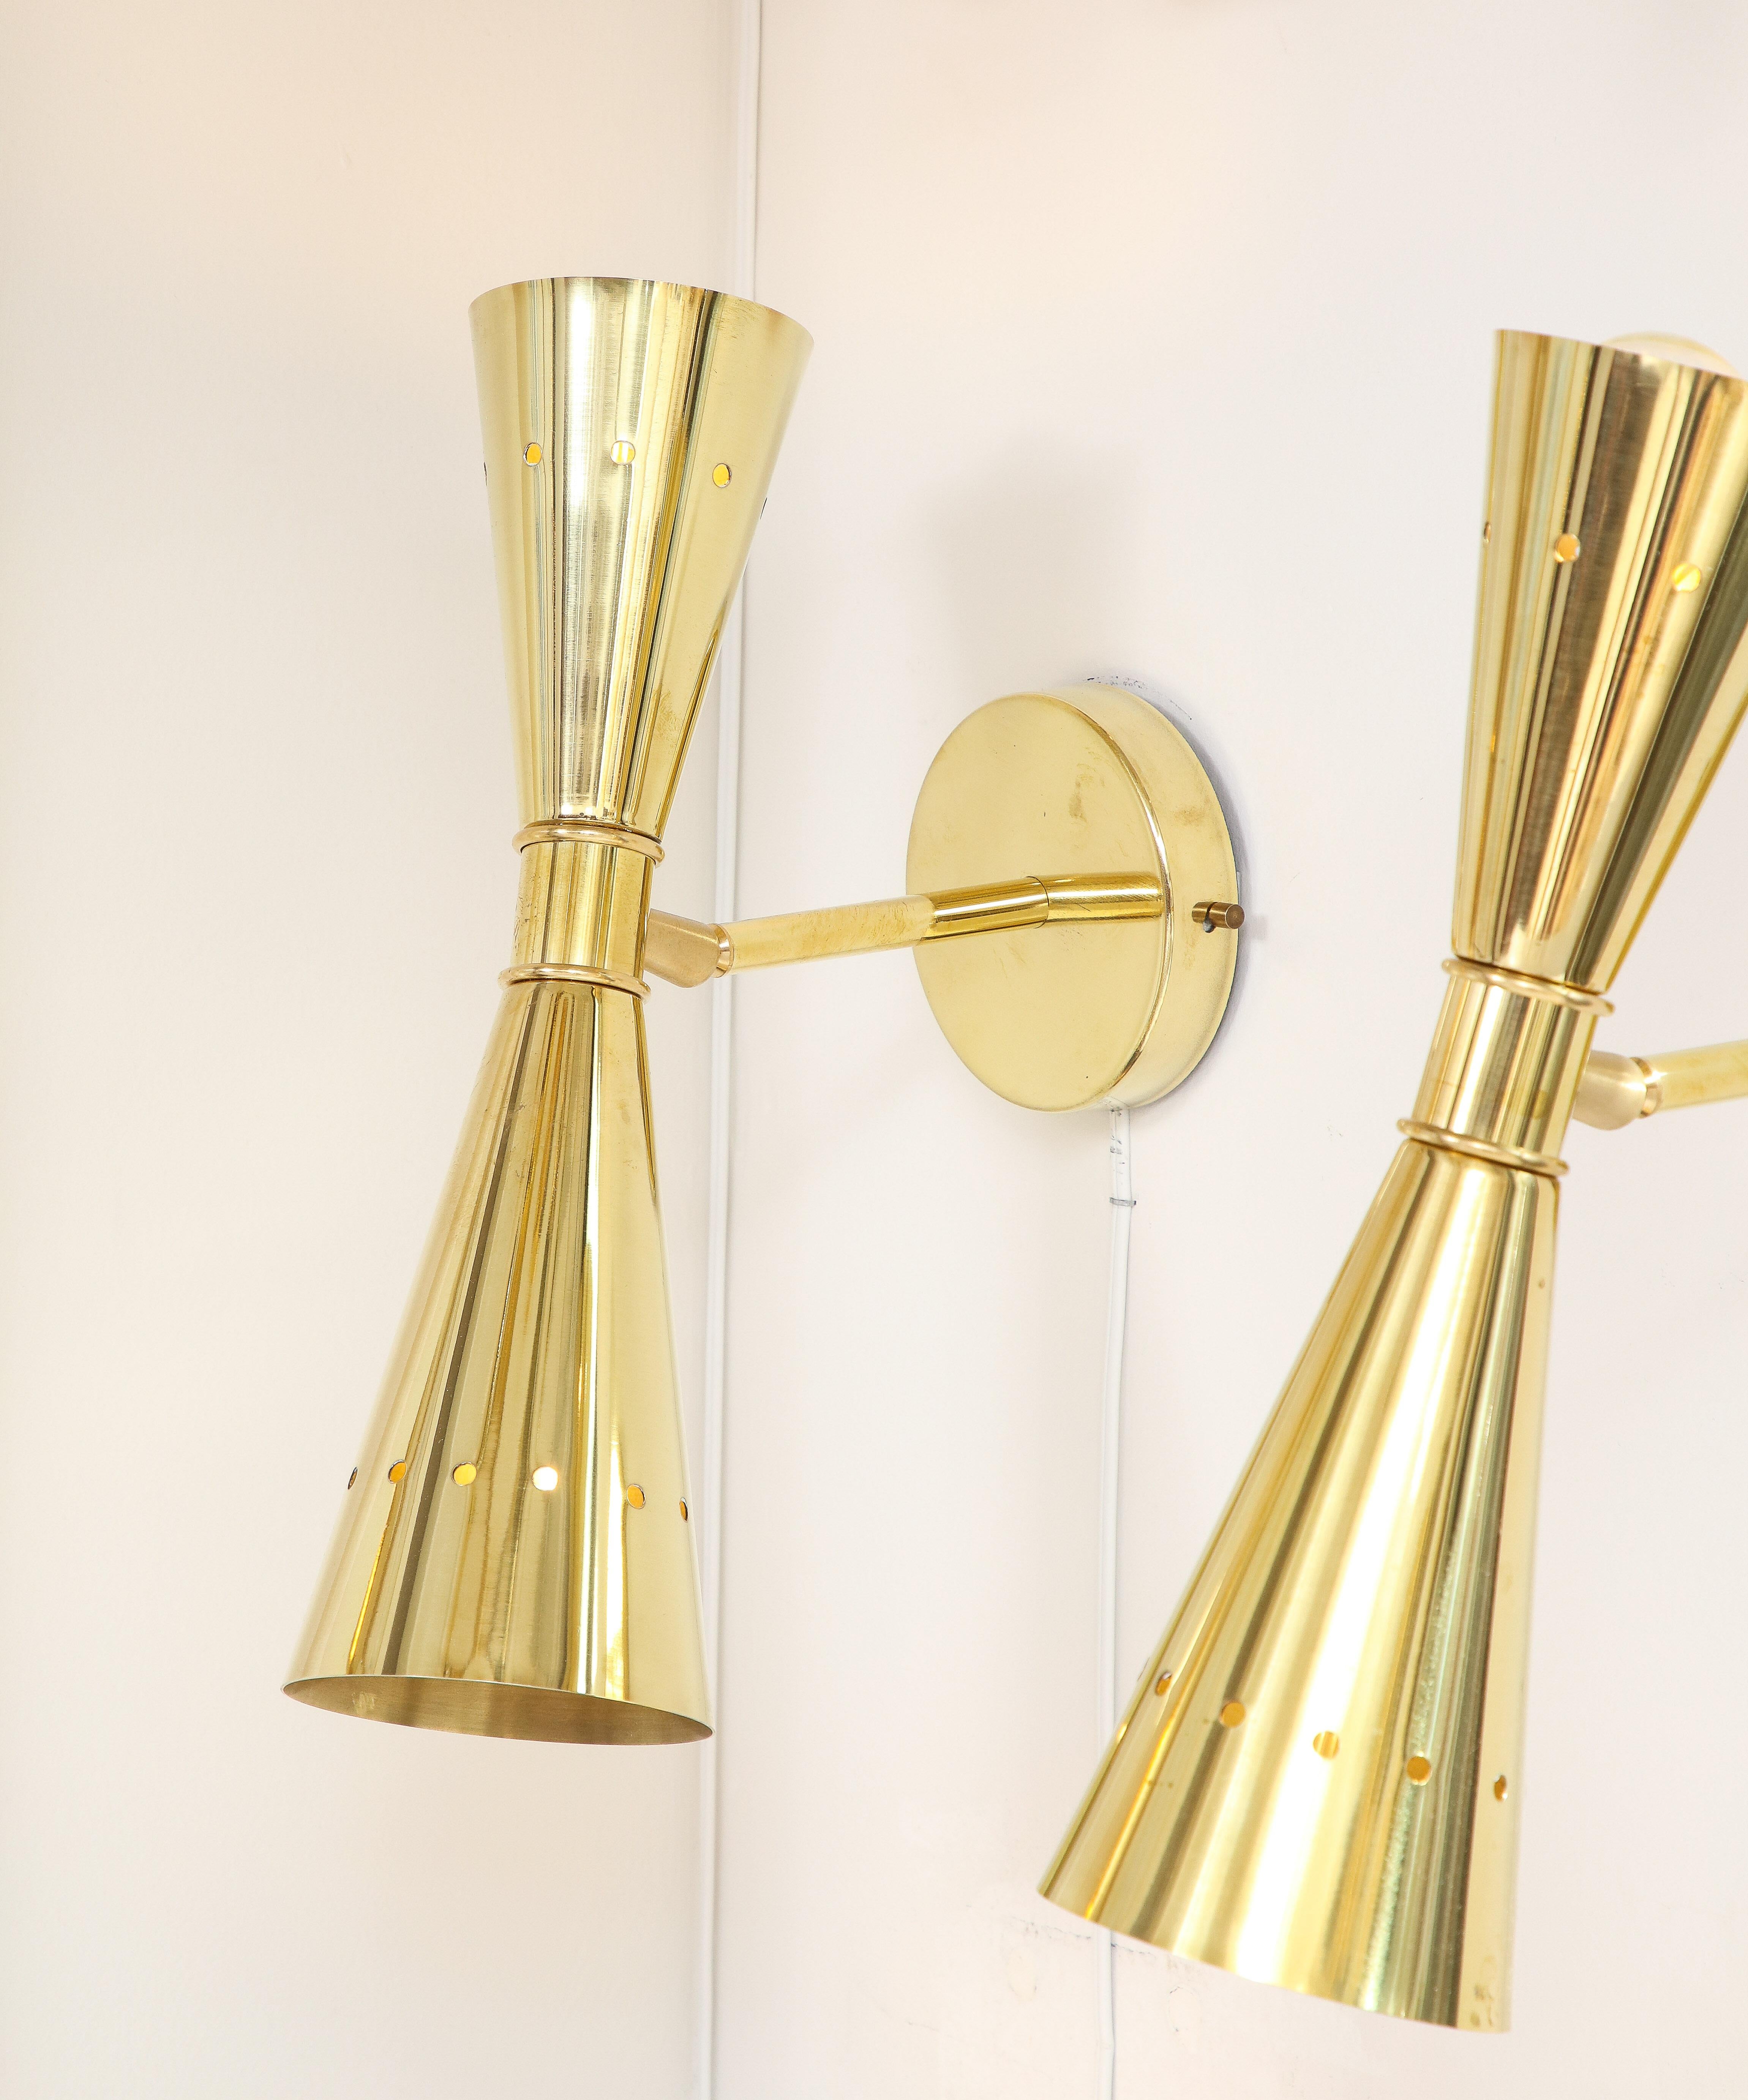 Set of Four Modernist Brass Double Cone Wall Lights or Sconces, Italy 2022 For Sale 2